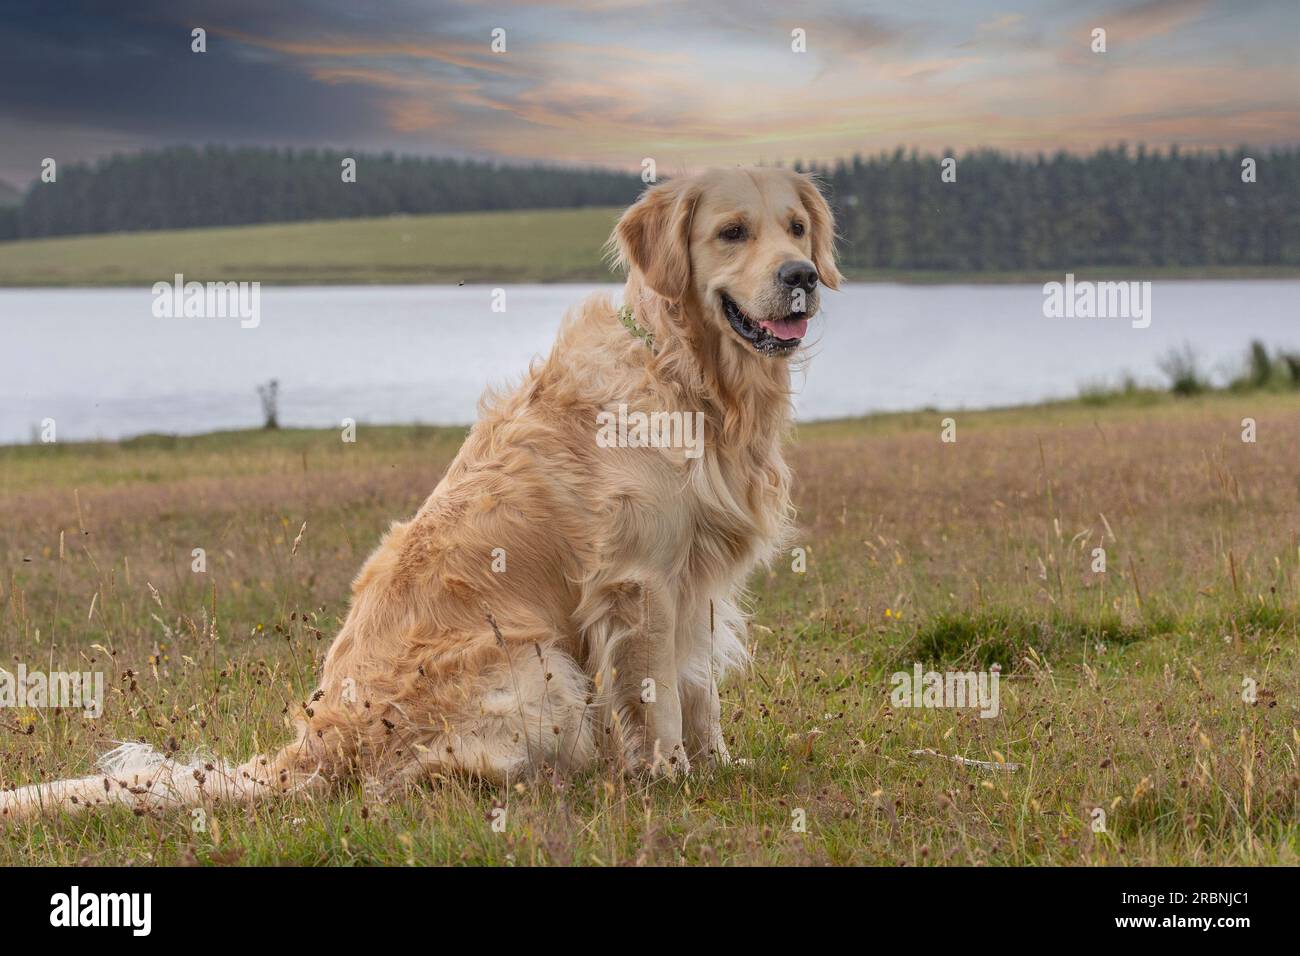 sitting in front of a country scene with. a lake Stock Photo